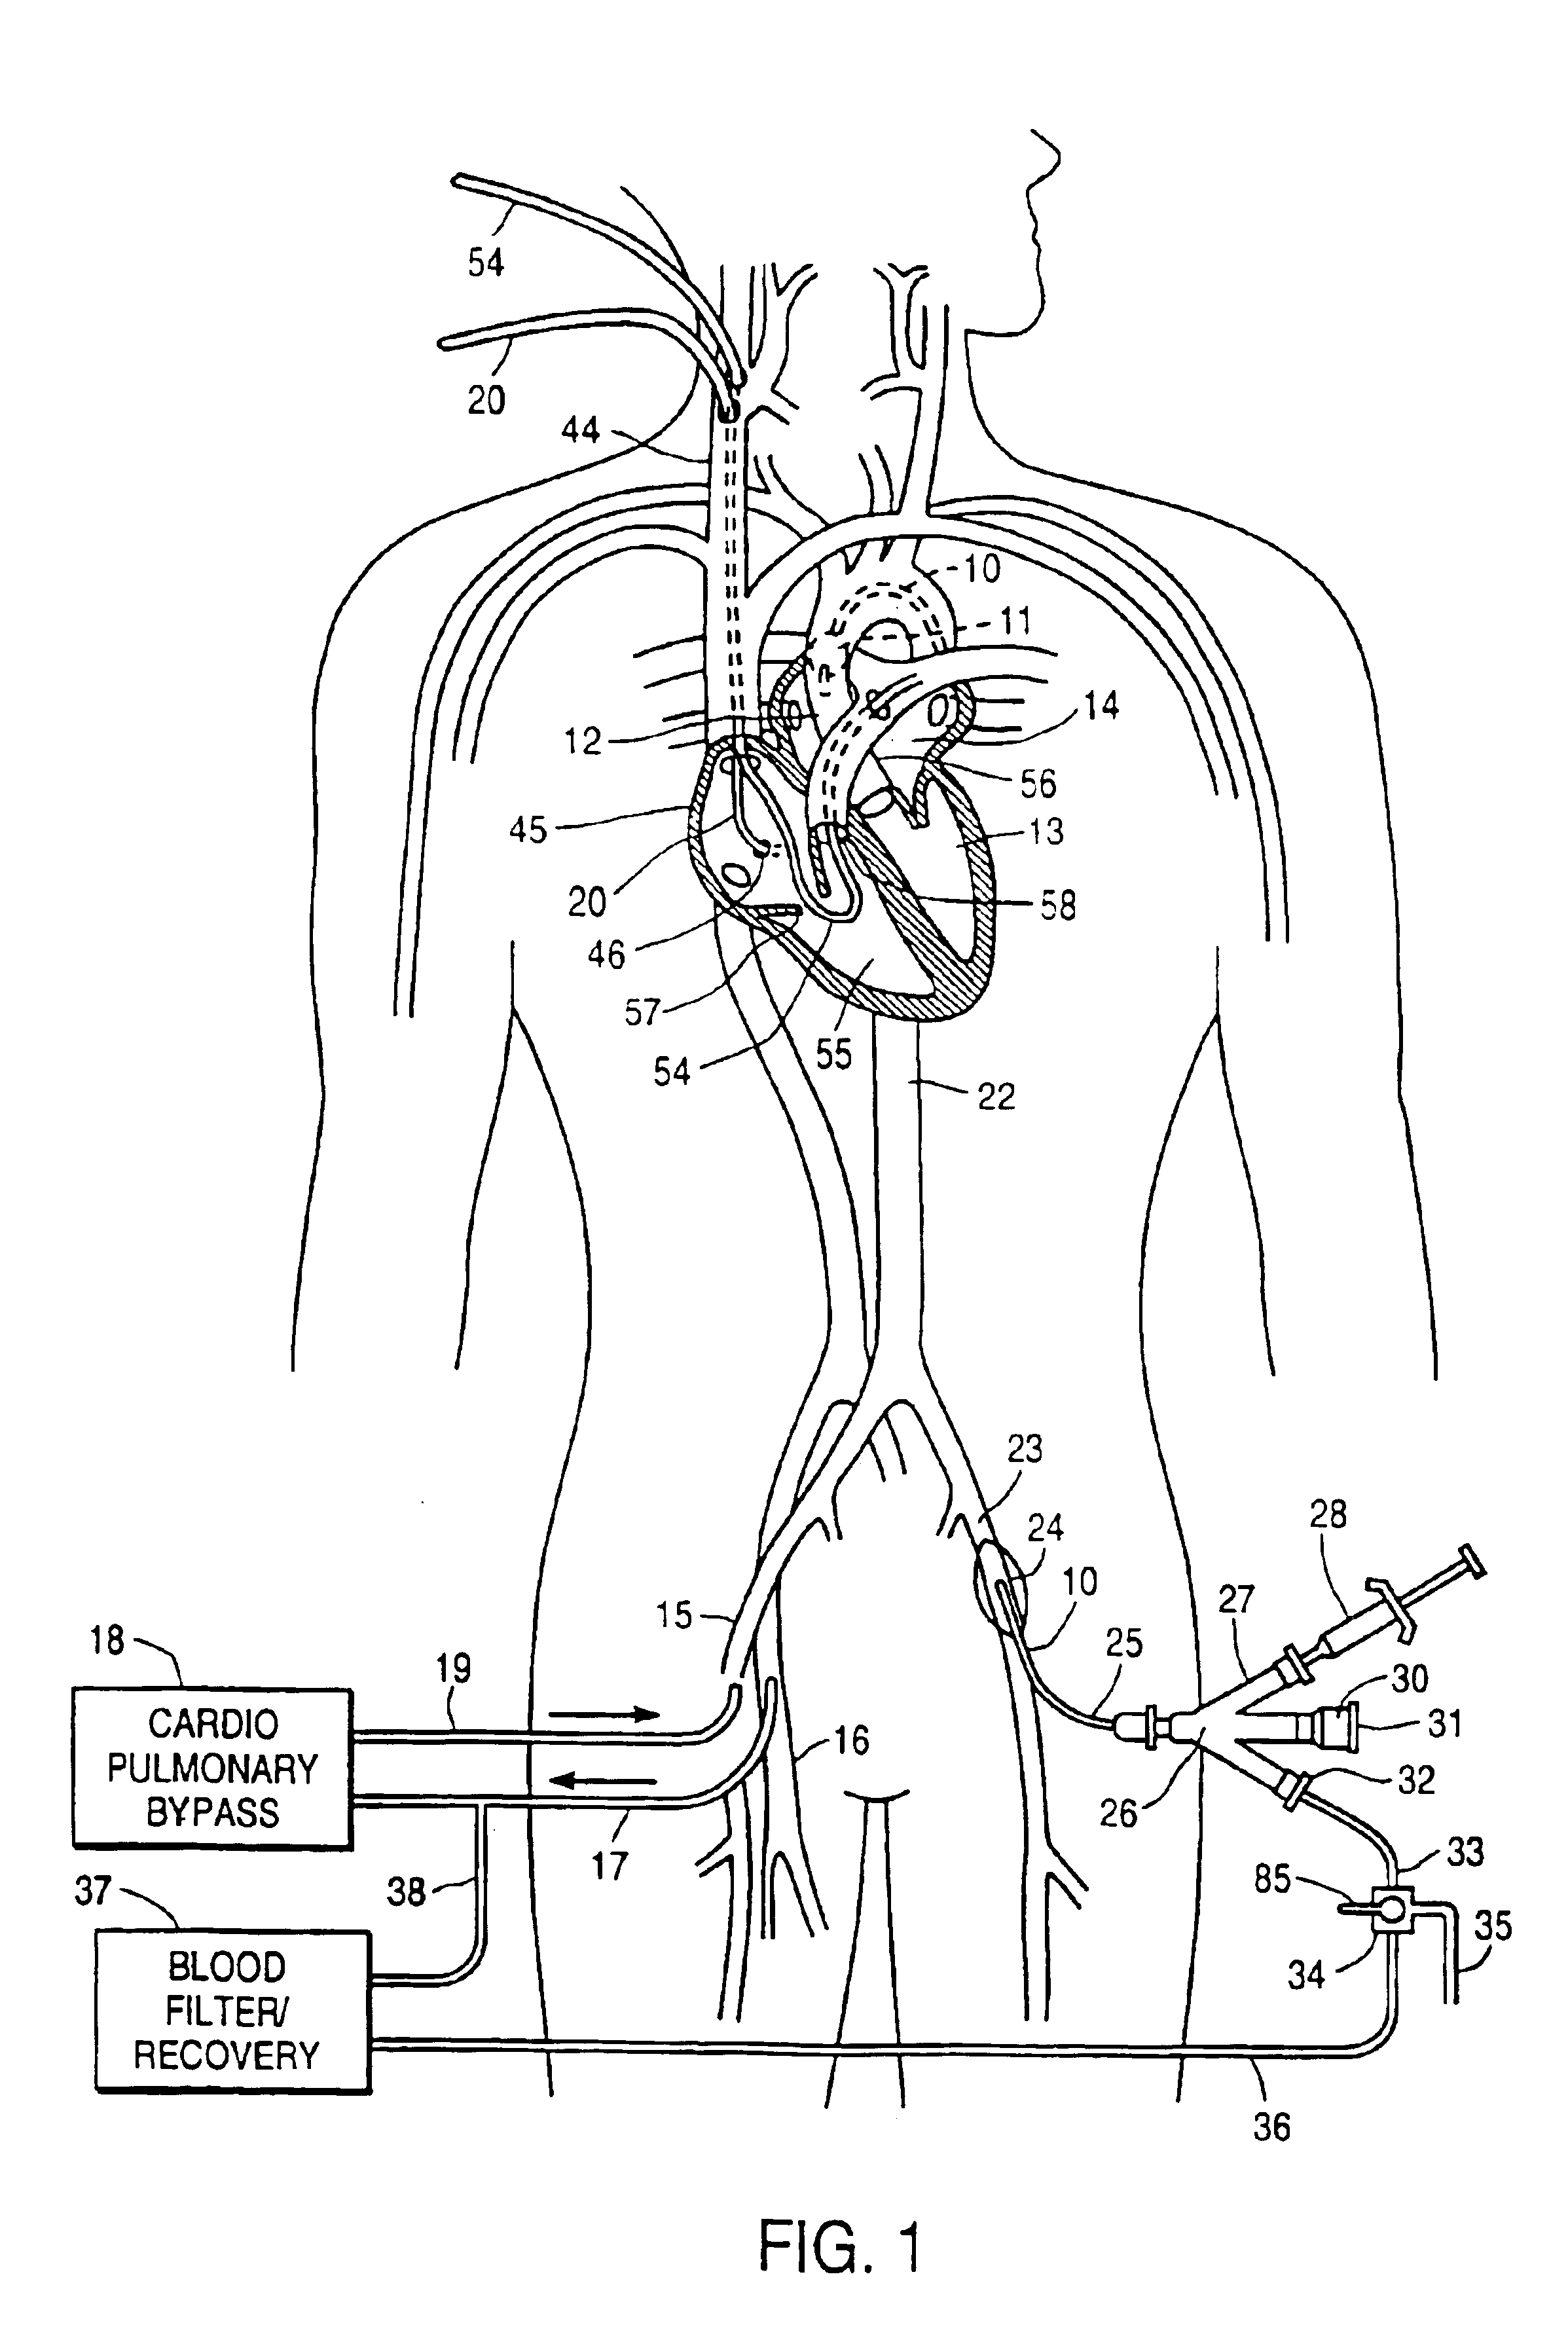 Endovascular system for arresting the heart